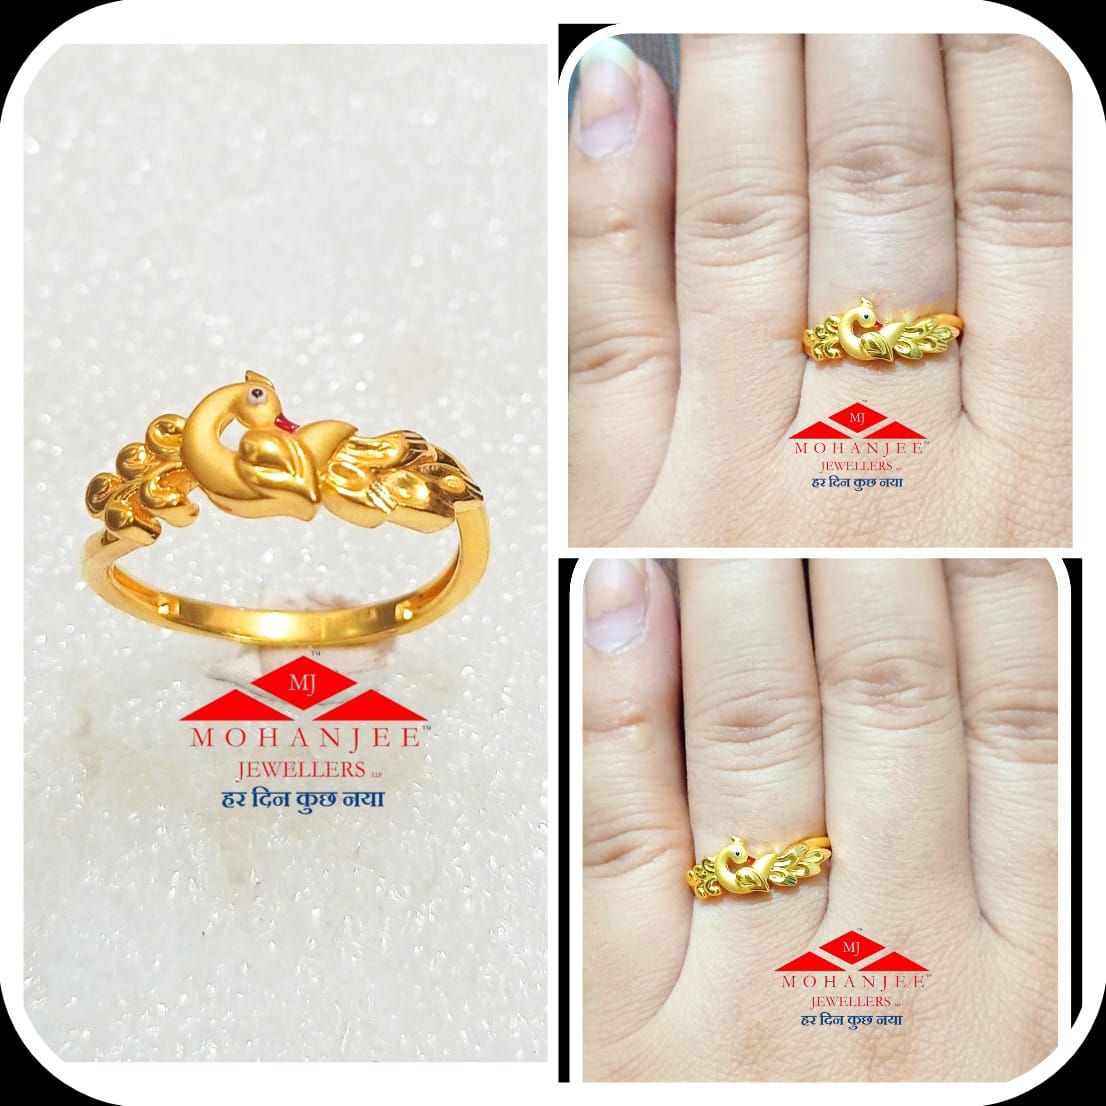 Buy 3 Gram Gold Rings For Men at Best Prices Online at Tata CLiQ